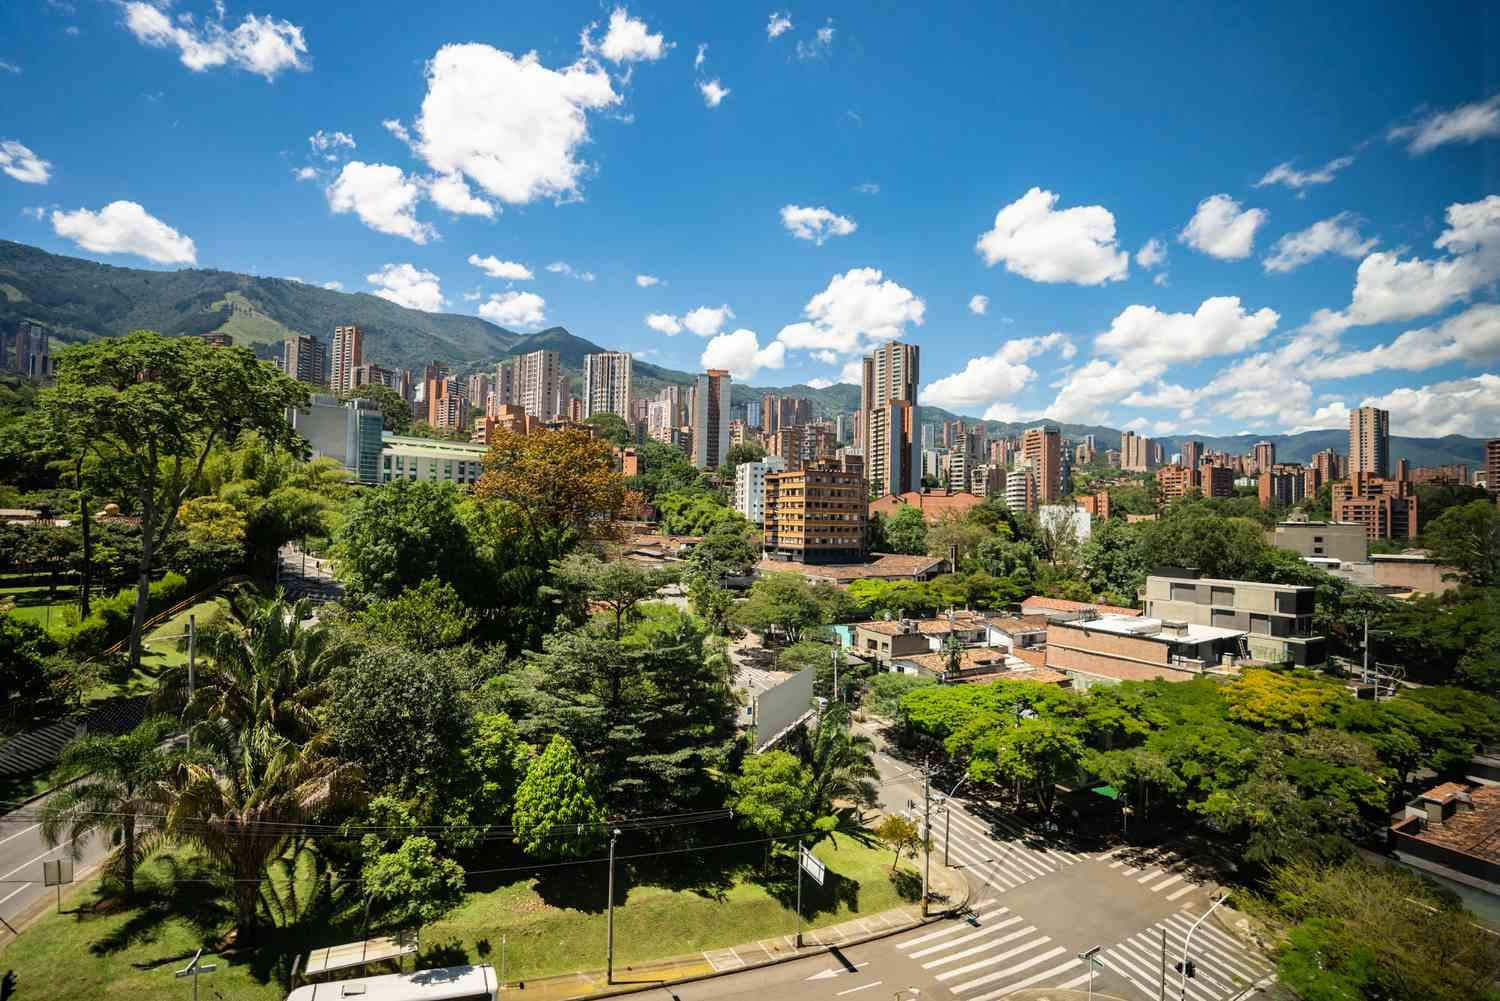 Discover the Vibrant Gem of Medellín: A Complete Travel Guide with Best Time to Visit, Top Attractions, Local Food, Safety Tips, Day Trips, Shopping and More